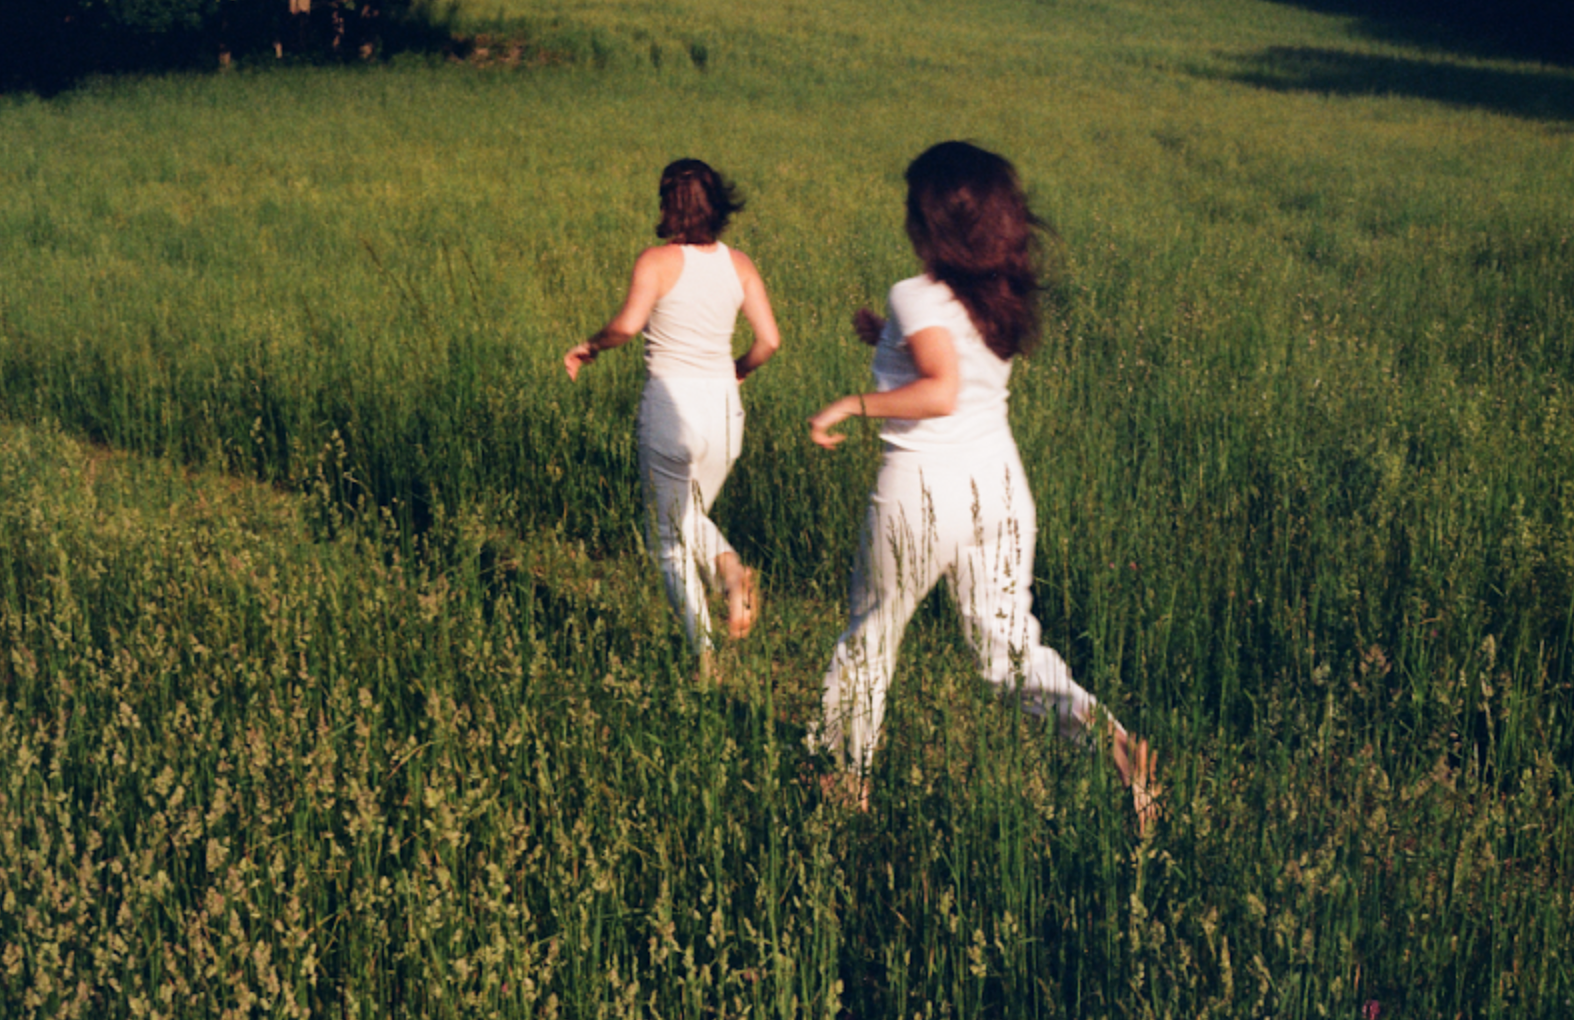 Two girls dressed in white running through a green field.